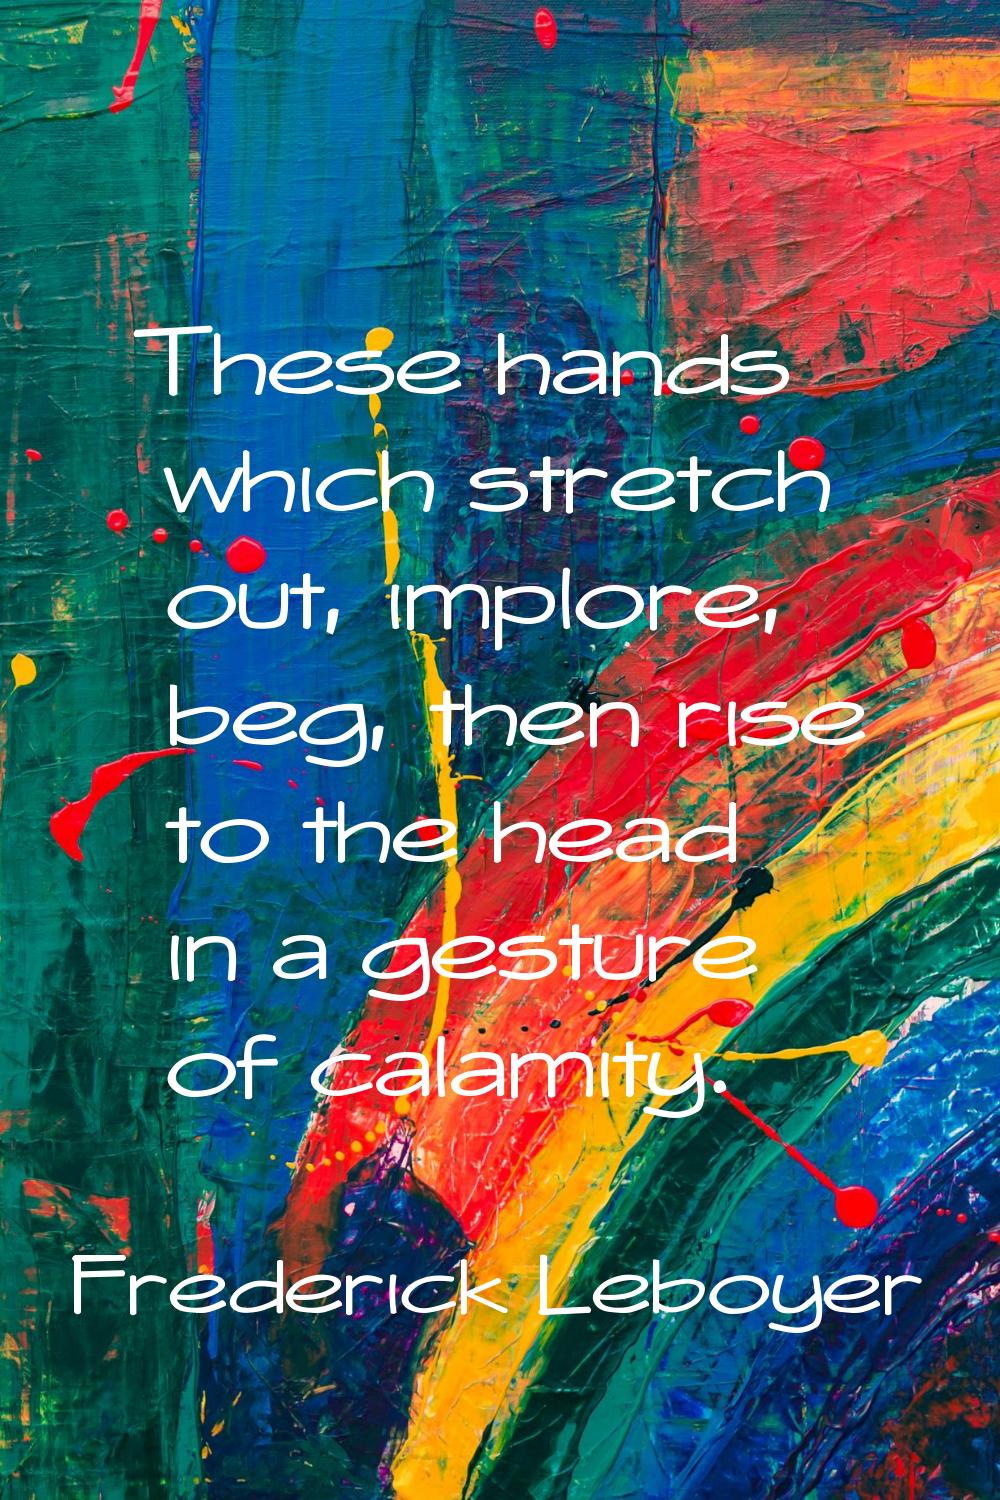 These hands which stretch out, implore, beg, then rise to the head in a gesture of calamity.